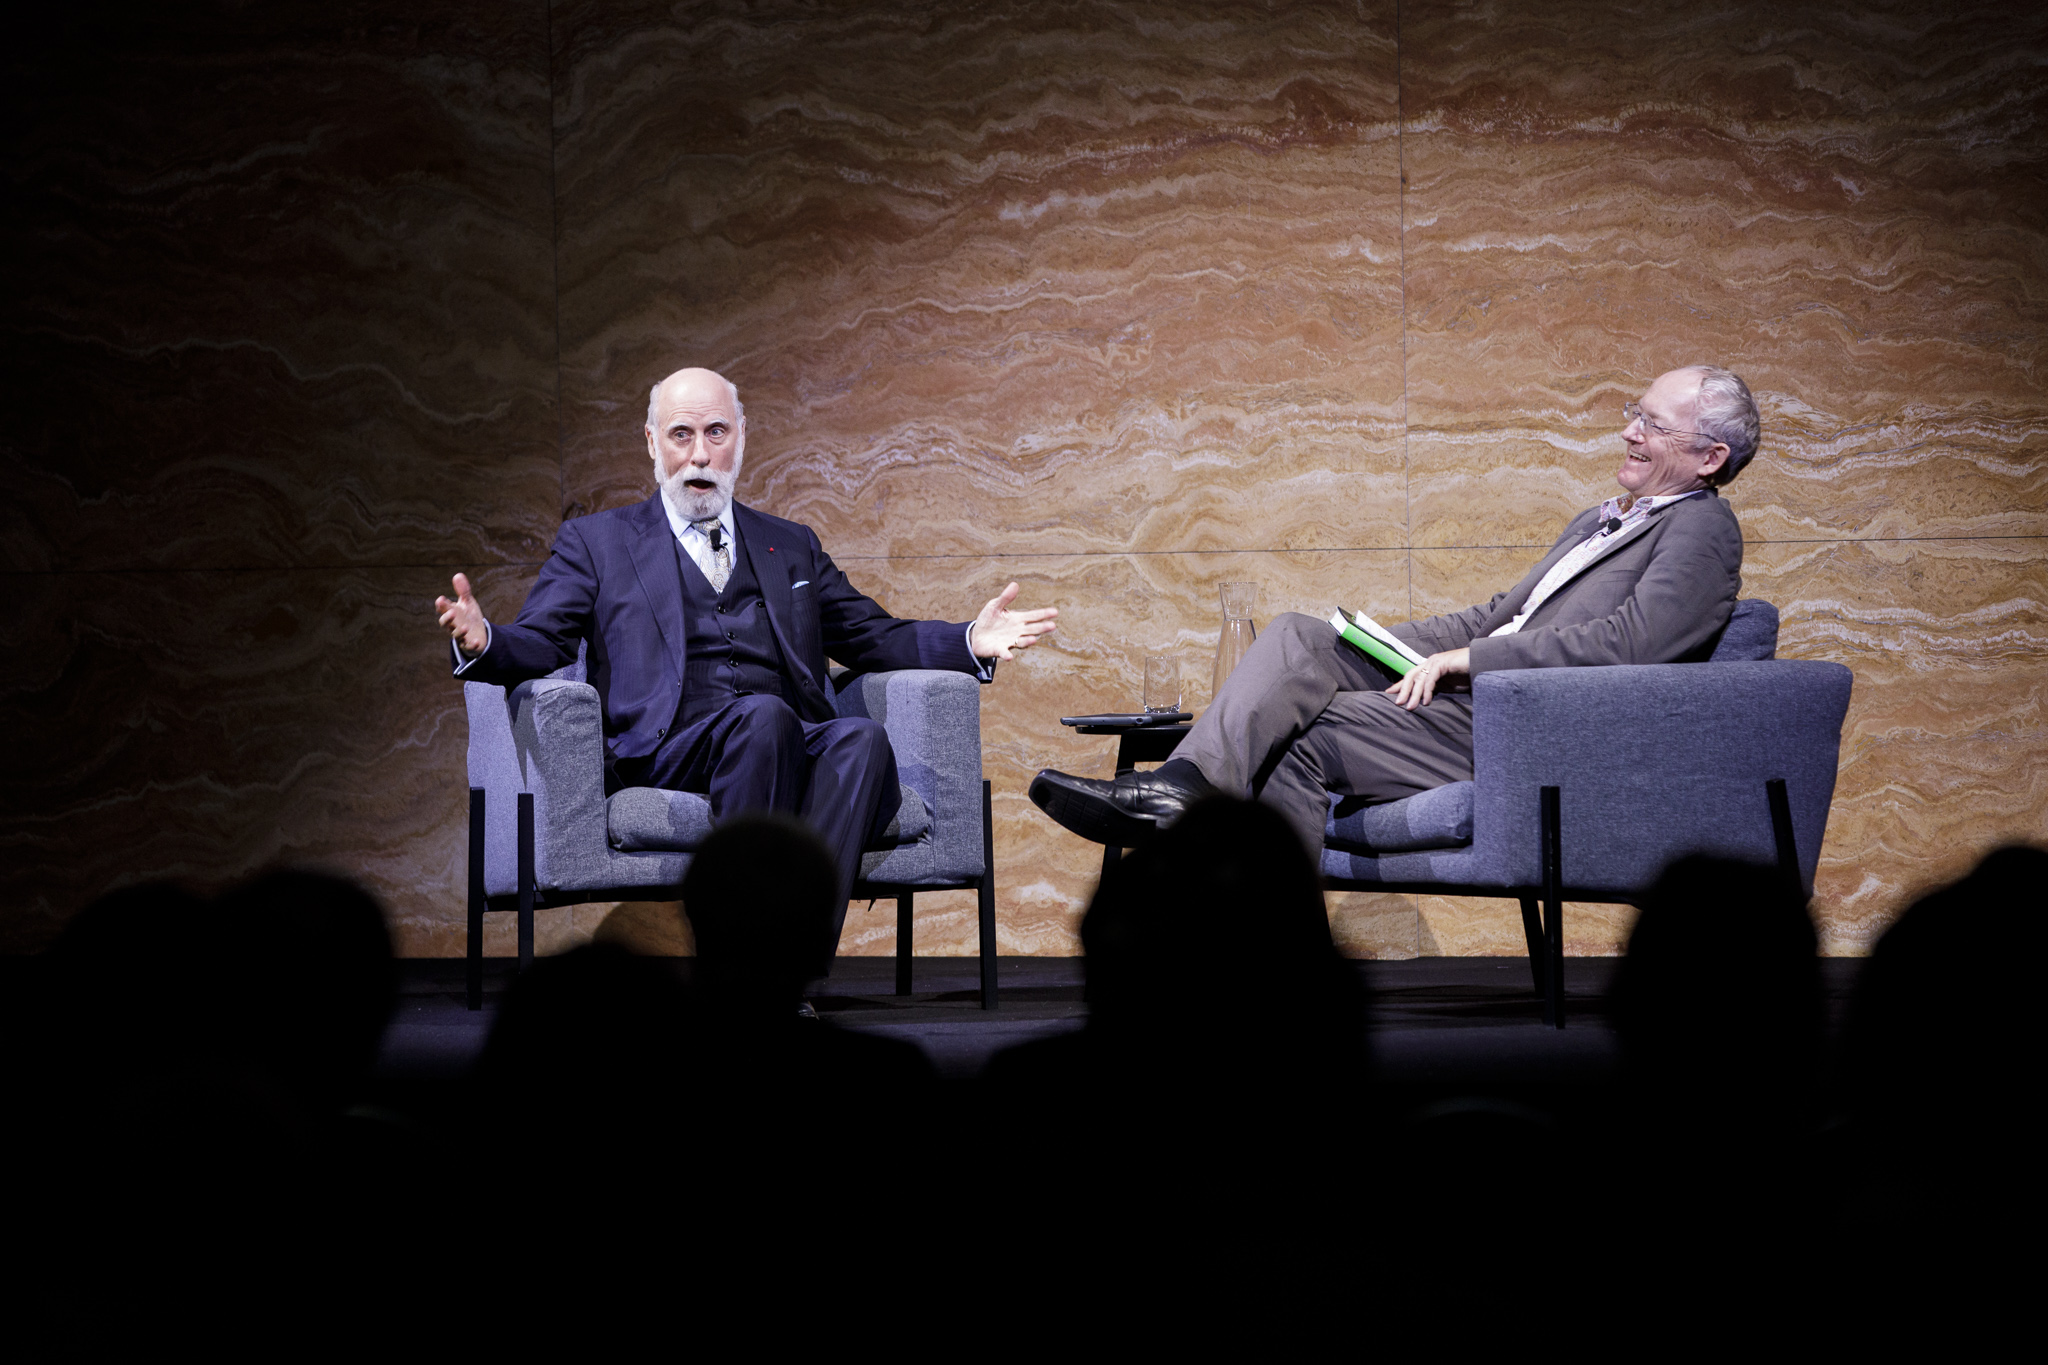 Vint Cerf talking to Toby Walsh